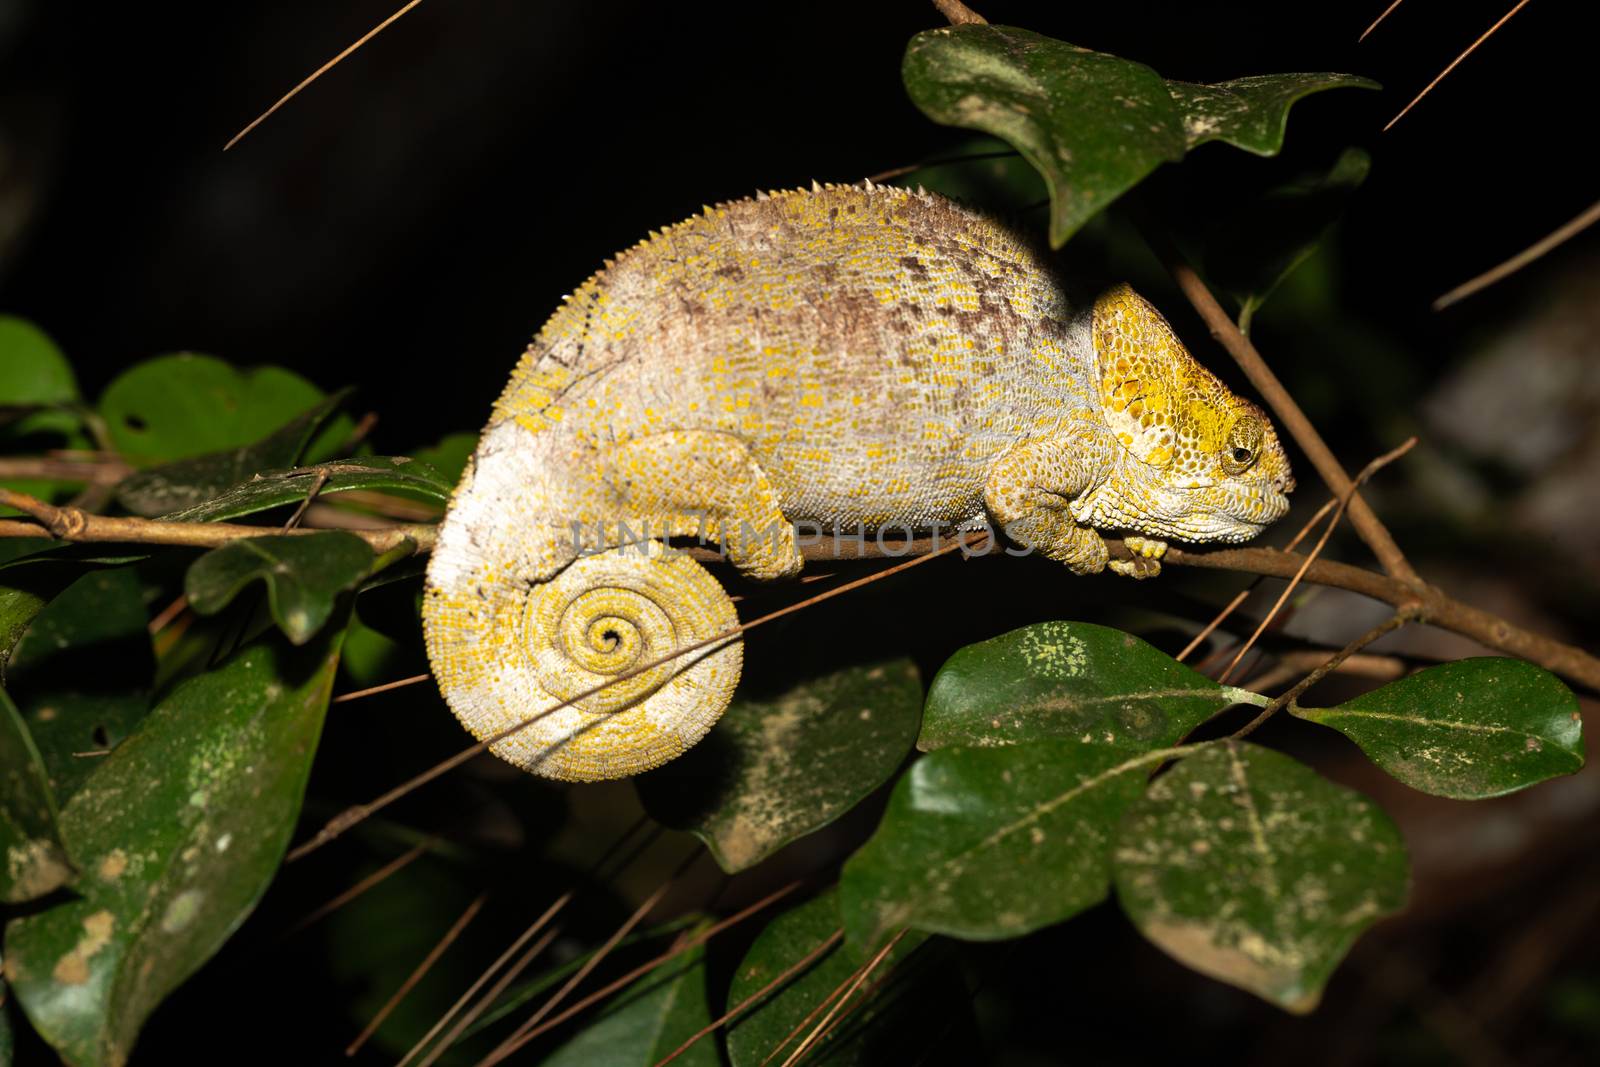 A chameleon on a branch in the rainforest of Madagascar by 25ehaag6